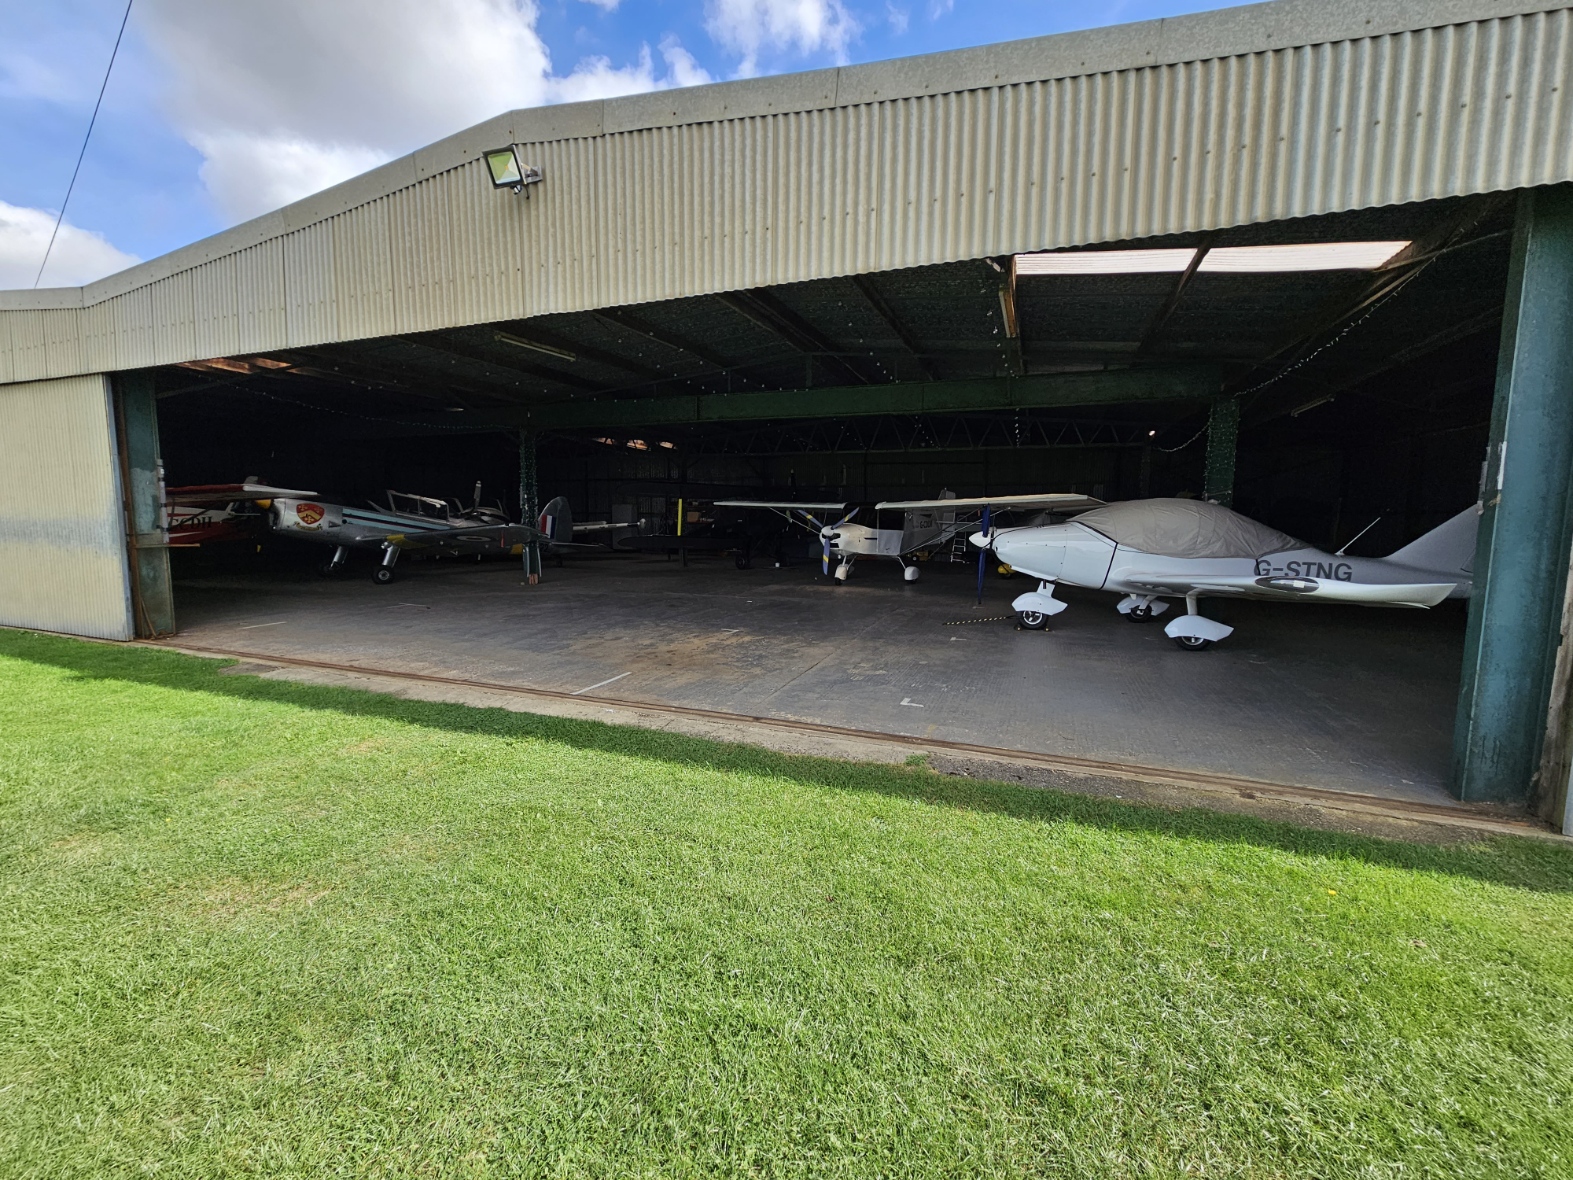 A corrugated iron aircraft hanger. There are five aircrafts visible. On the right a silver painted Chipmunk, with an RAF roundel visible under it's left wing. On the right a white single propeller 3-axis microlight with a cover over the canopy.